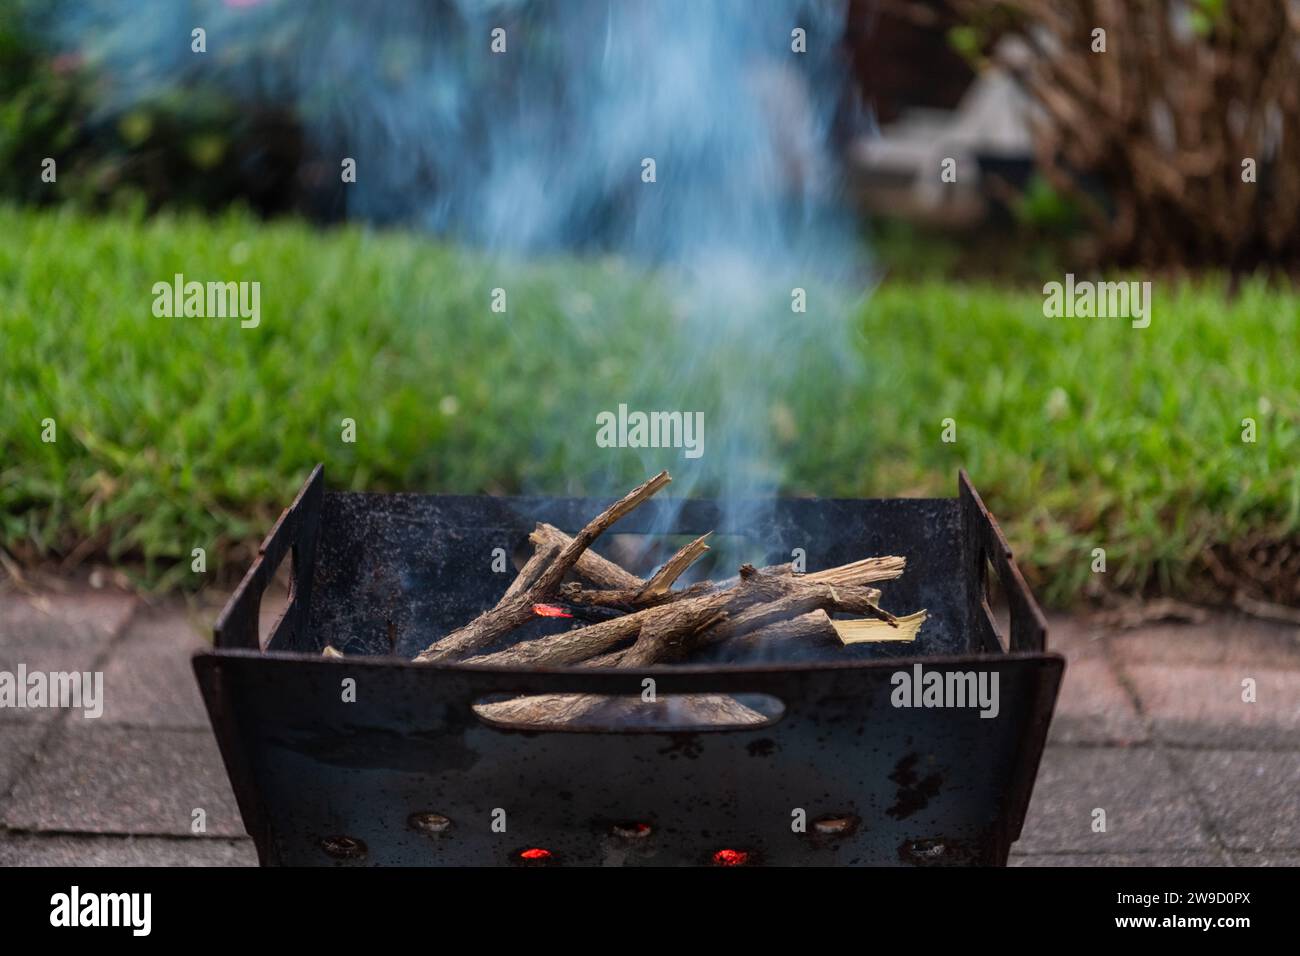 Smoke and wood, burning firewood in the fire pit without flames Stock Photo